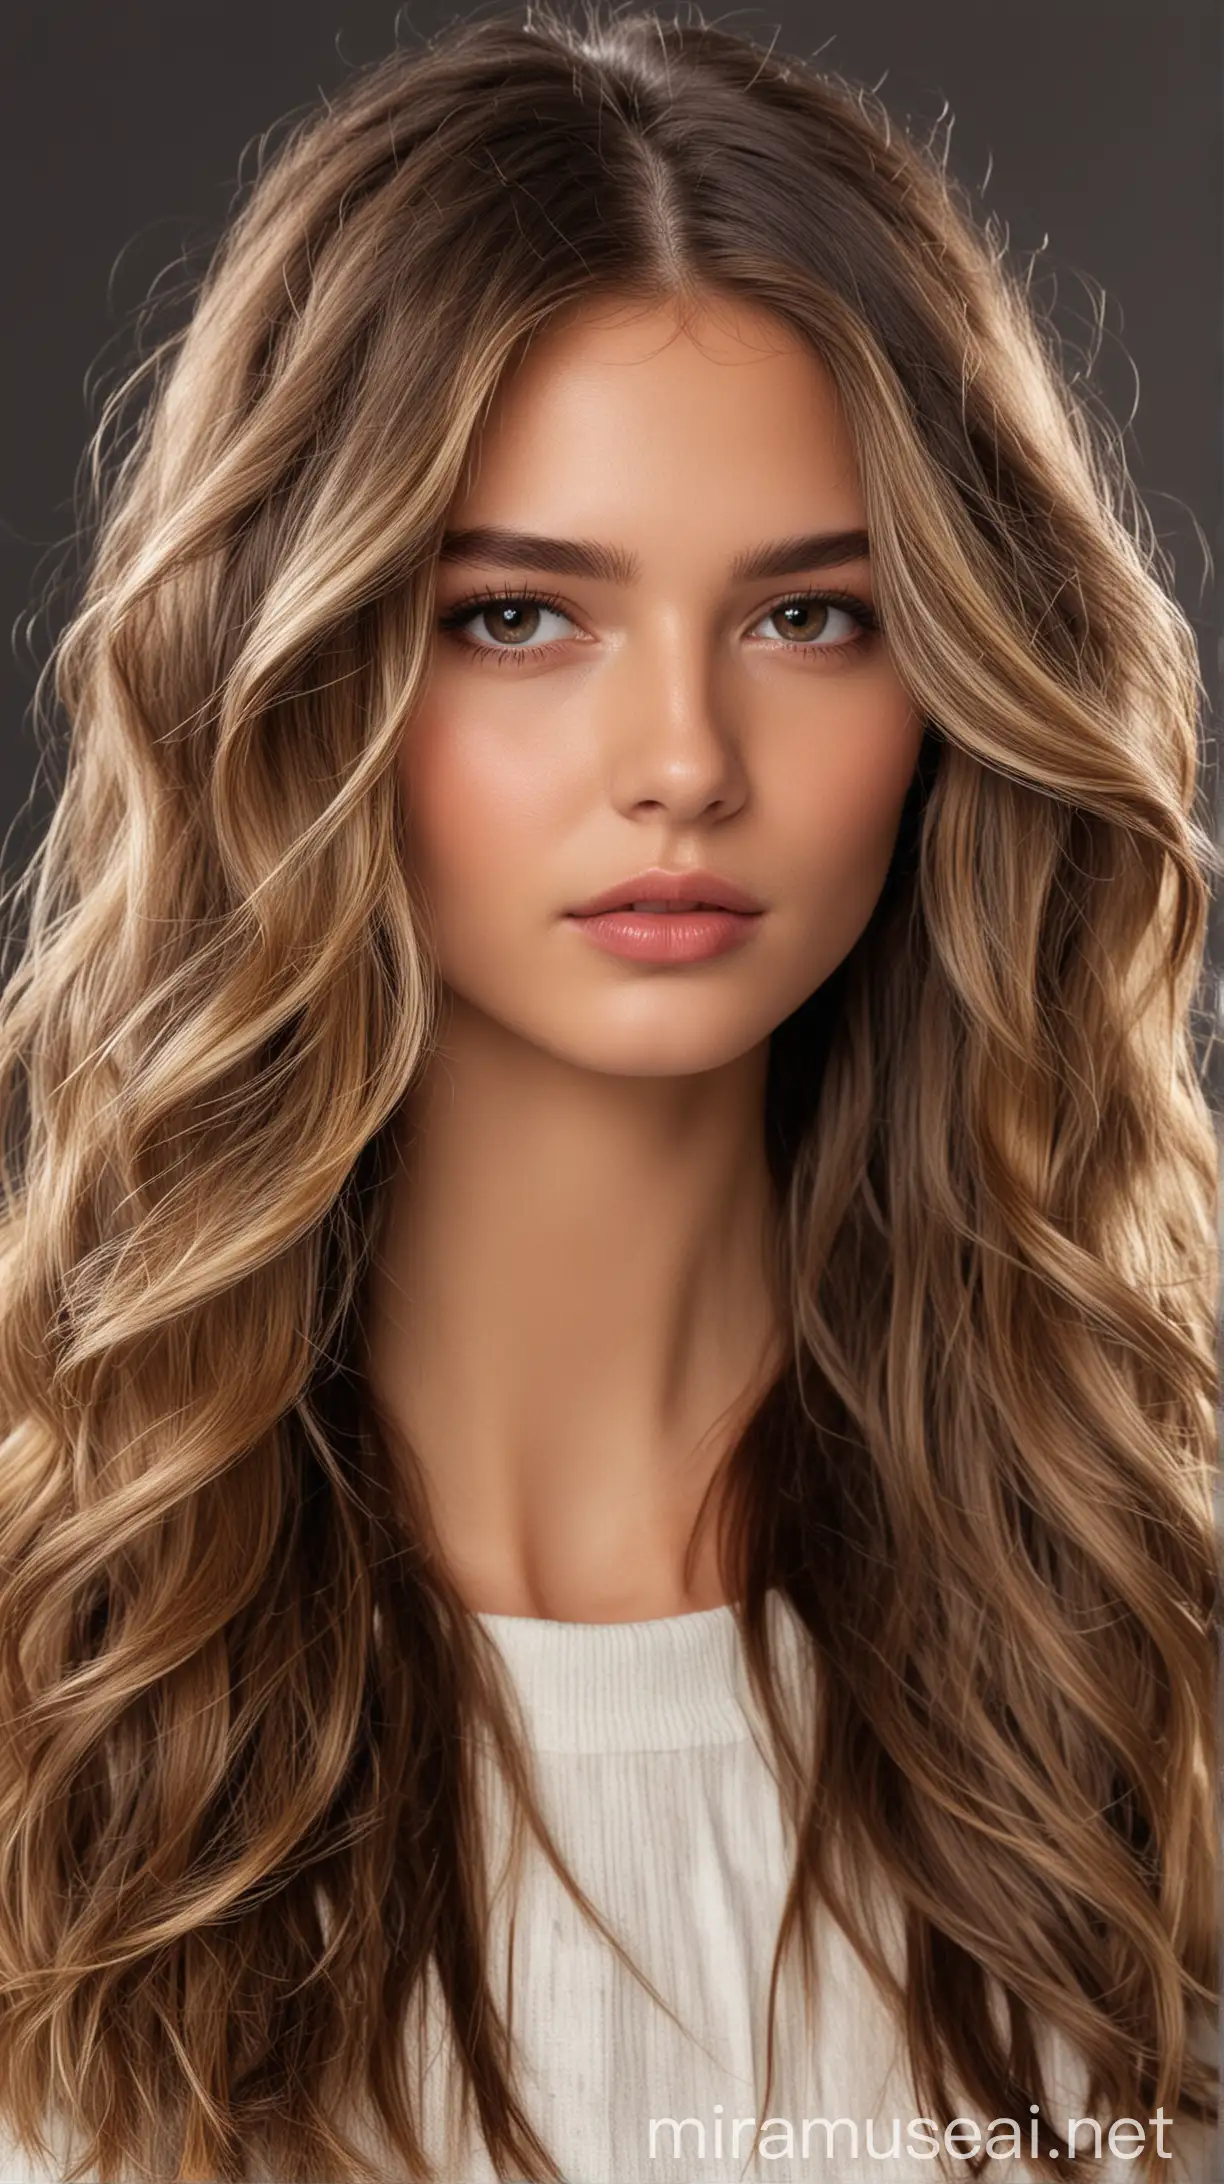 Brunette Balayage Hair Model with Spectacular Appearance